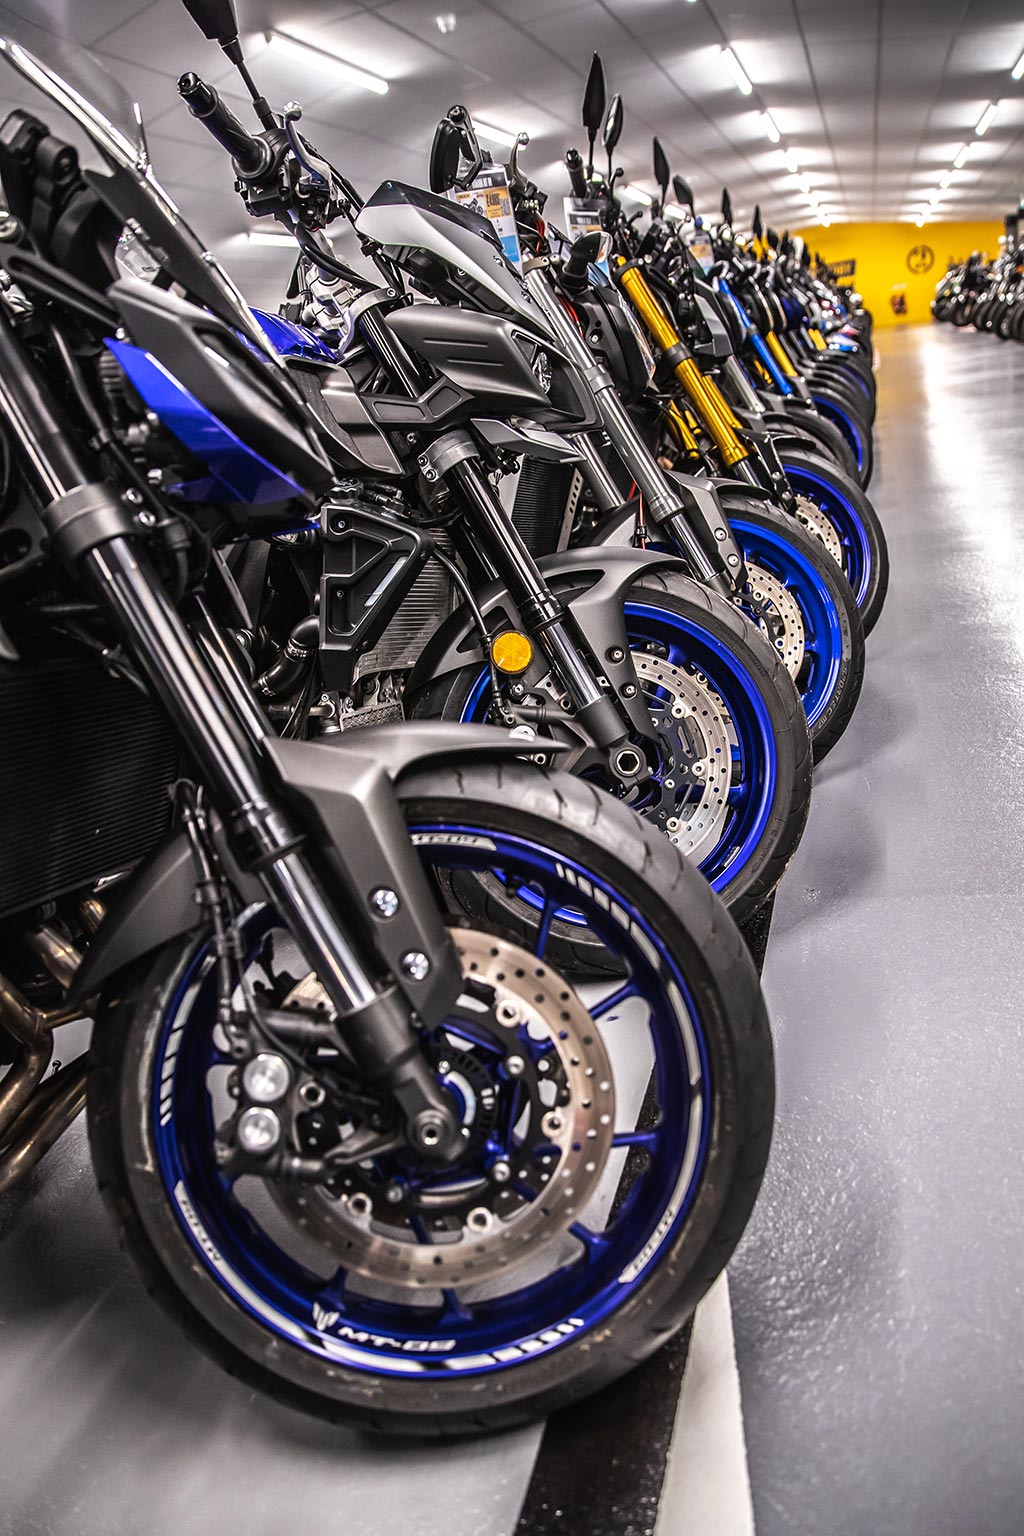 The Superbike Factory Case Study